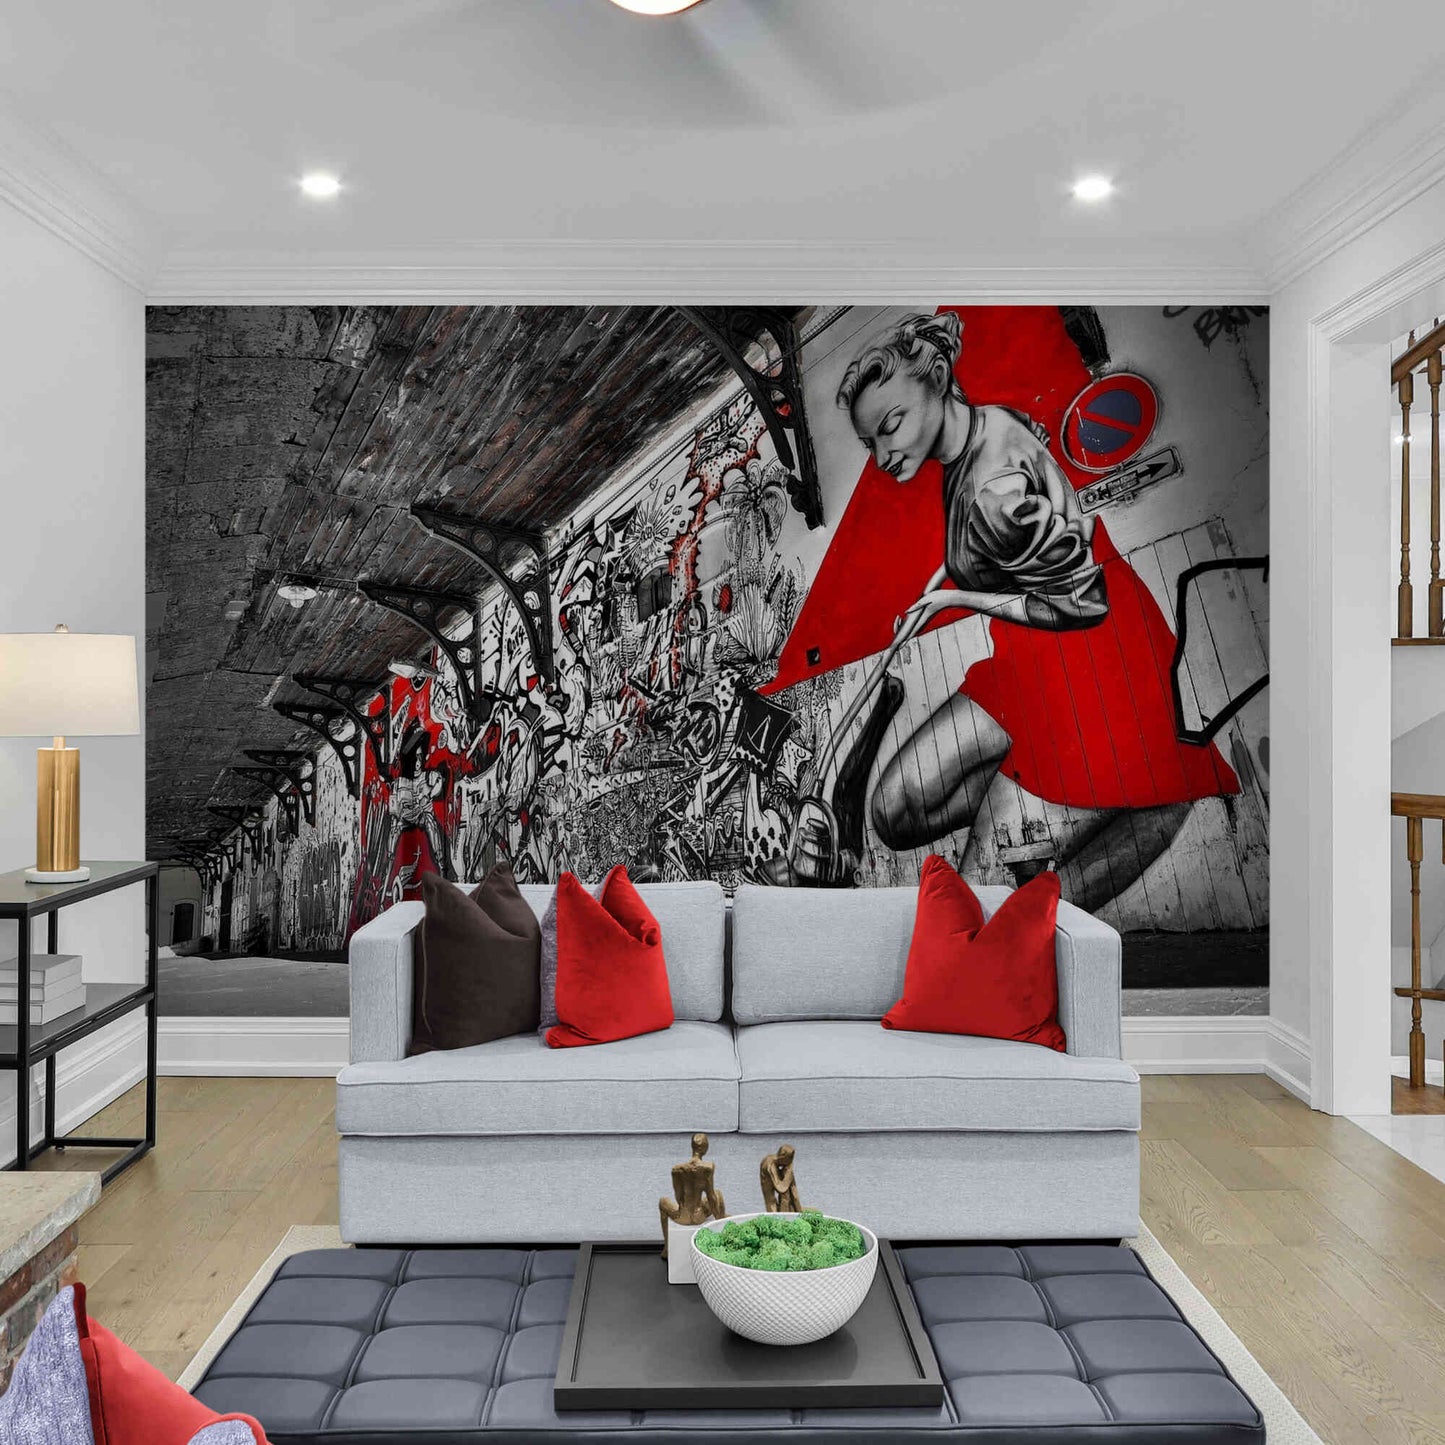 Colorful abstract graffiti landscape, transforming spaces with dynamic wall mural art.